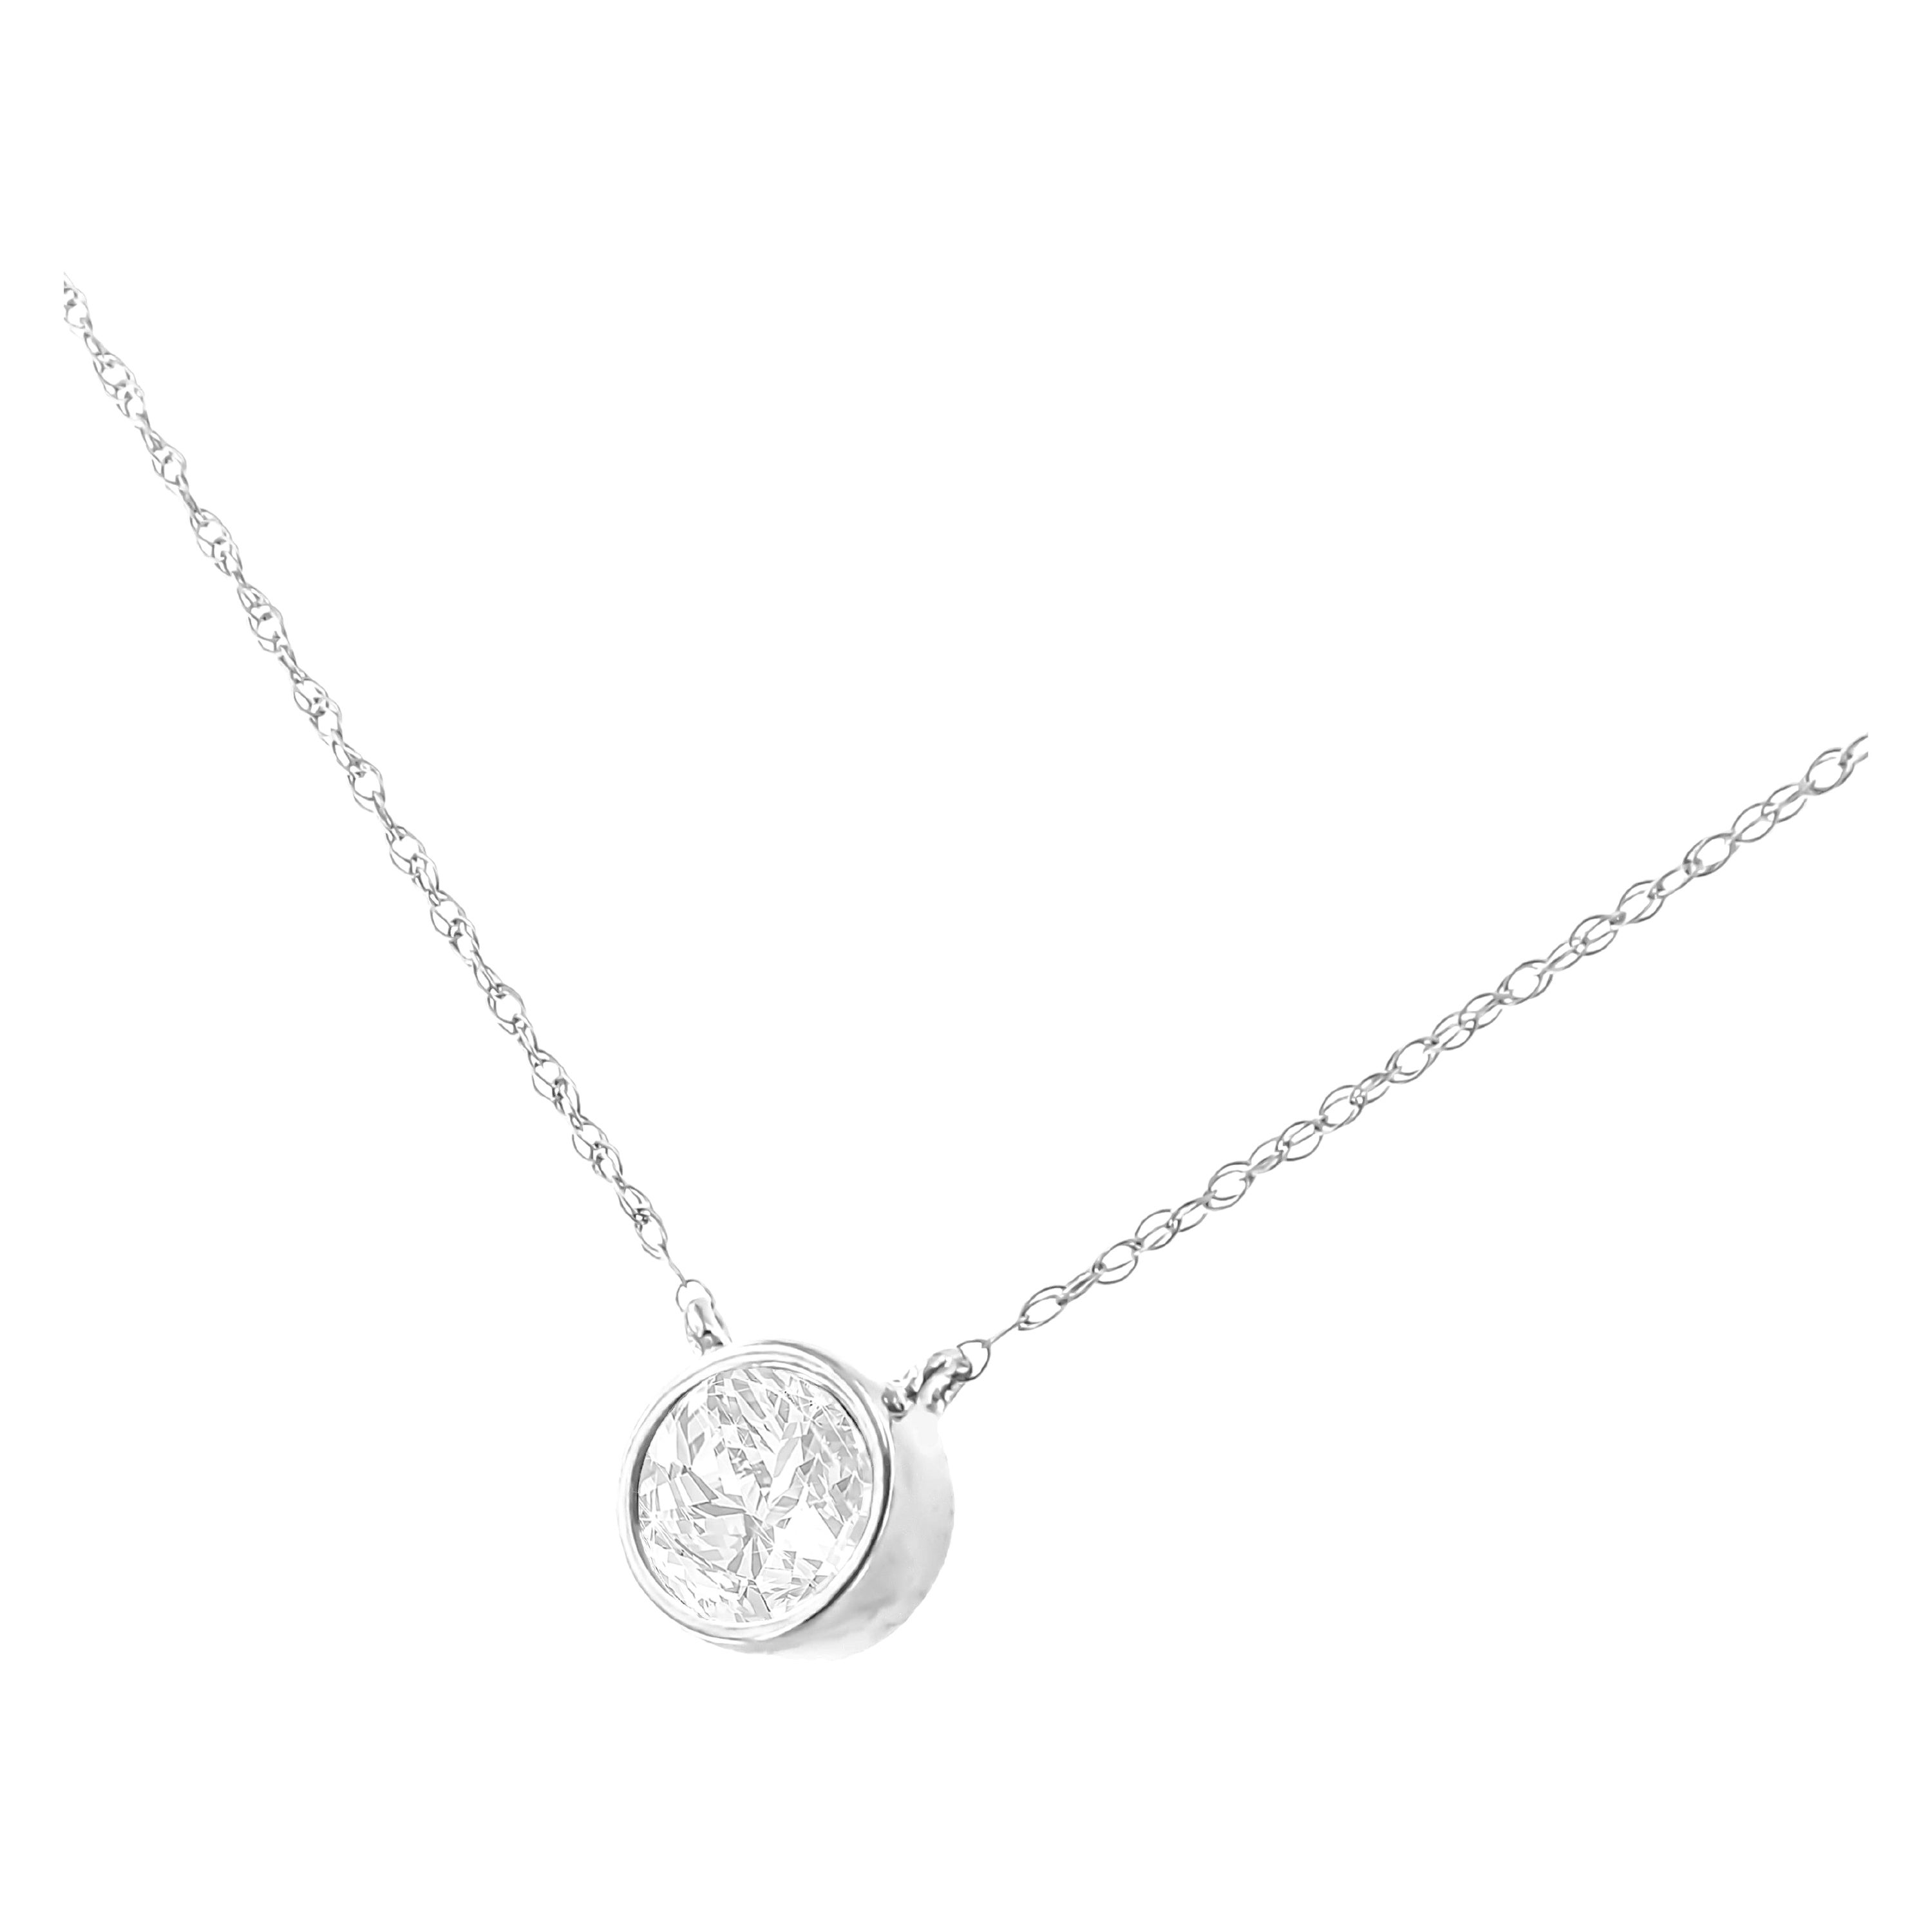 AGS Certified 10K White Gold 1/5 Carat Diamond Adjustable Pendant Necklace For Sale